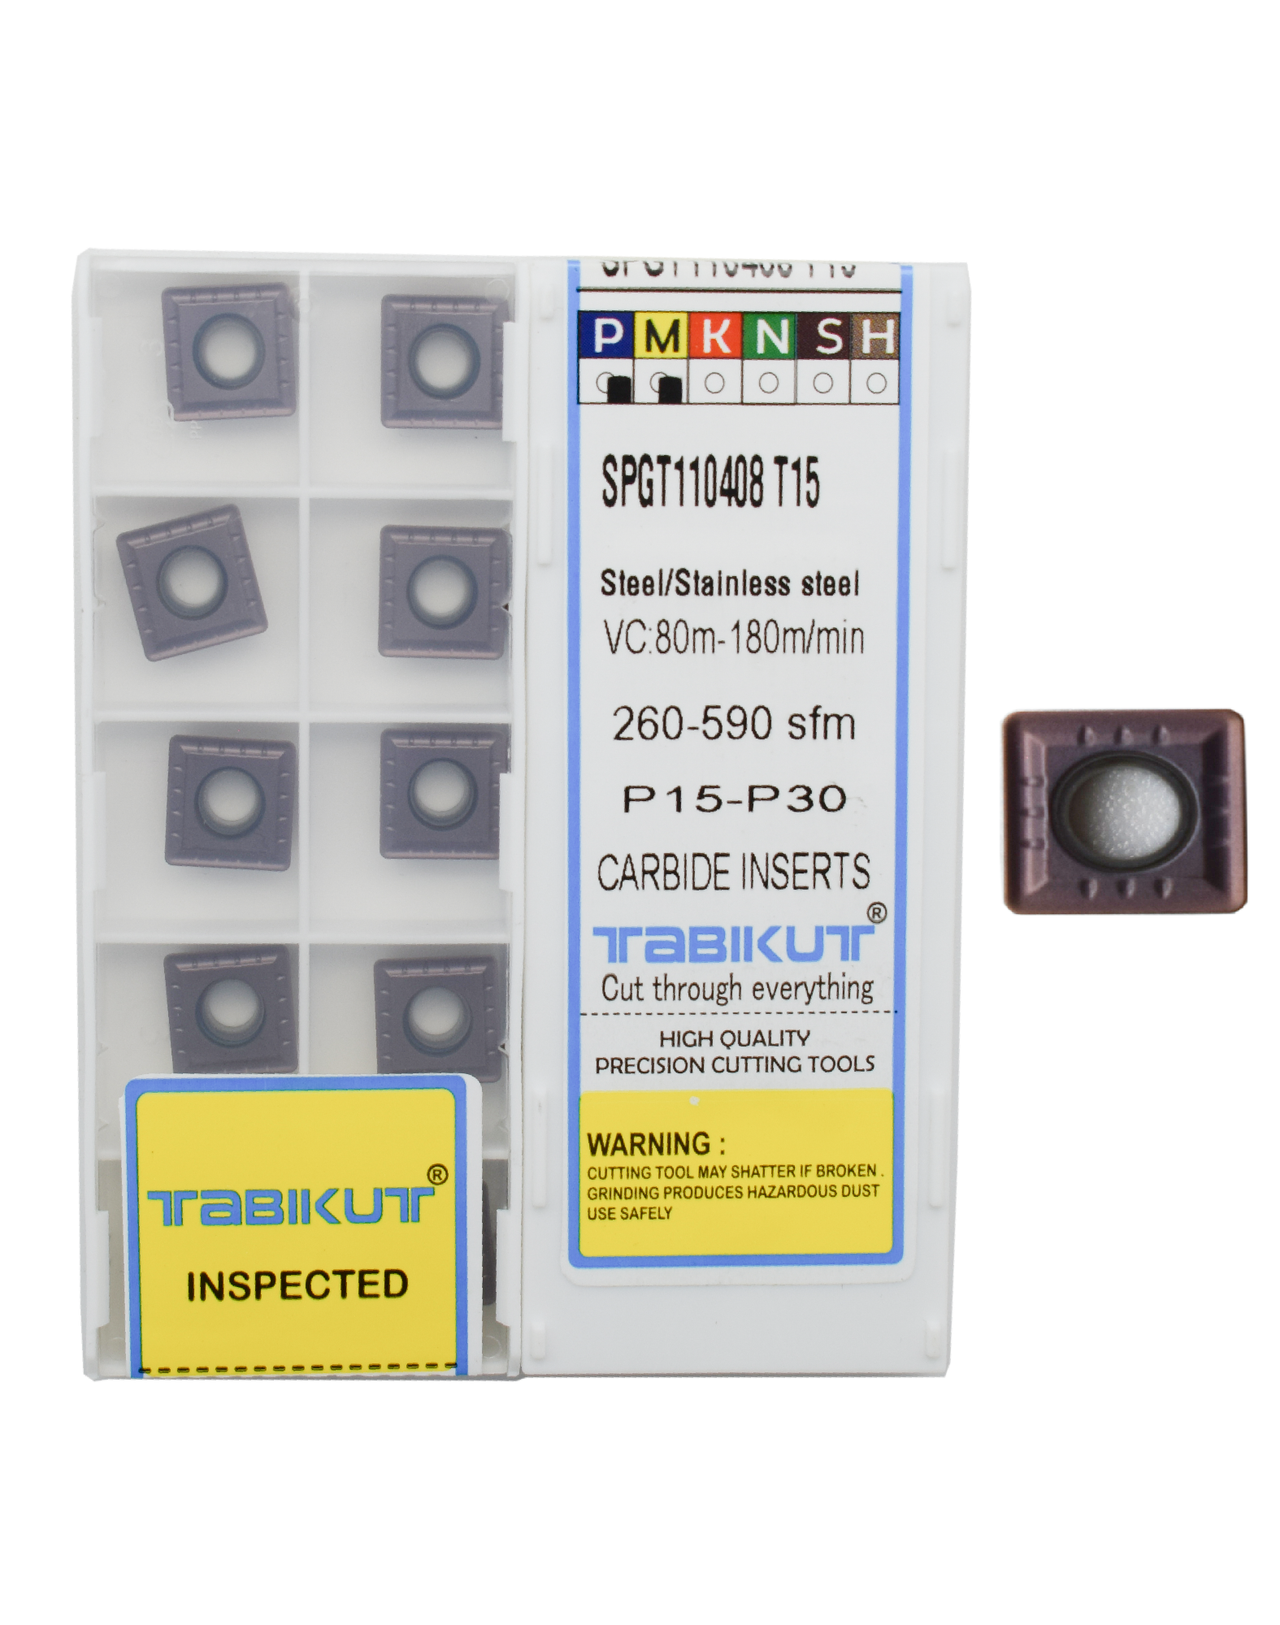 SPGT T15 grade inserts multigrade for steel, stainless steel pack of 10